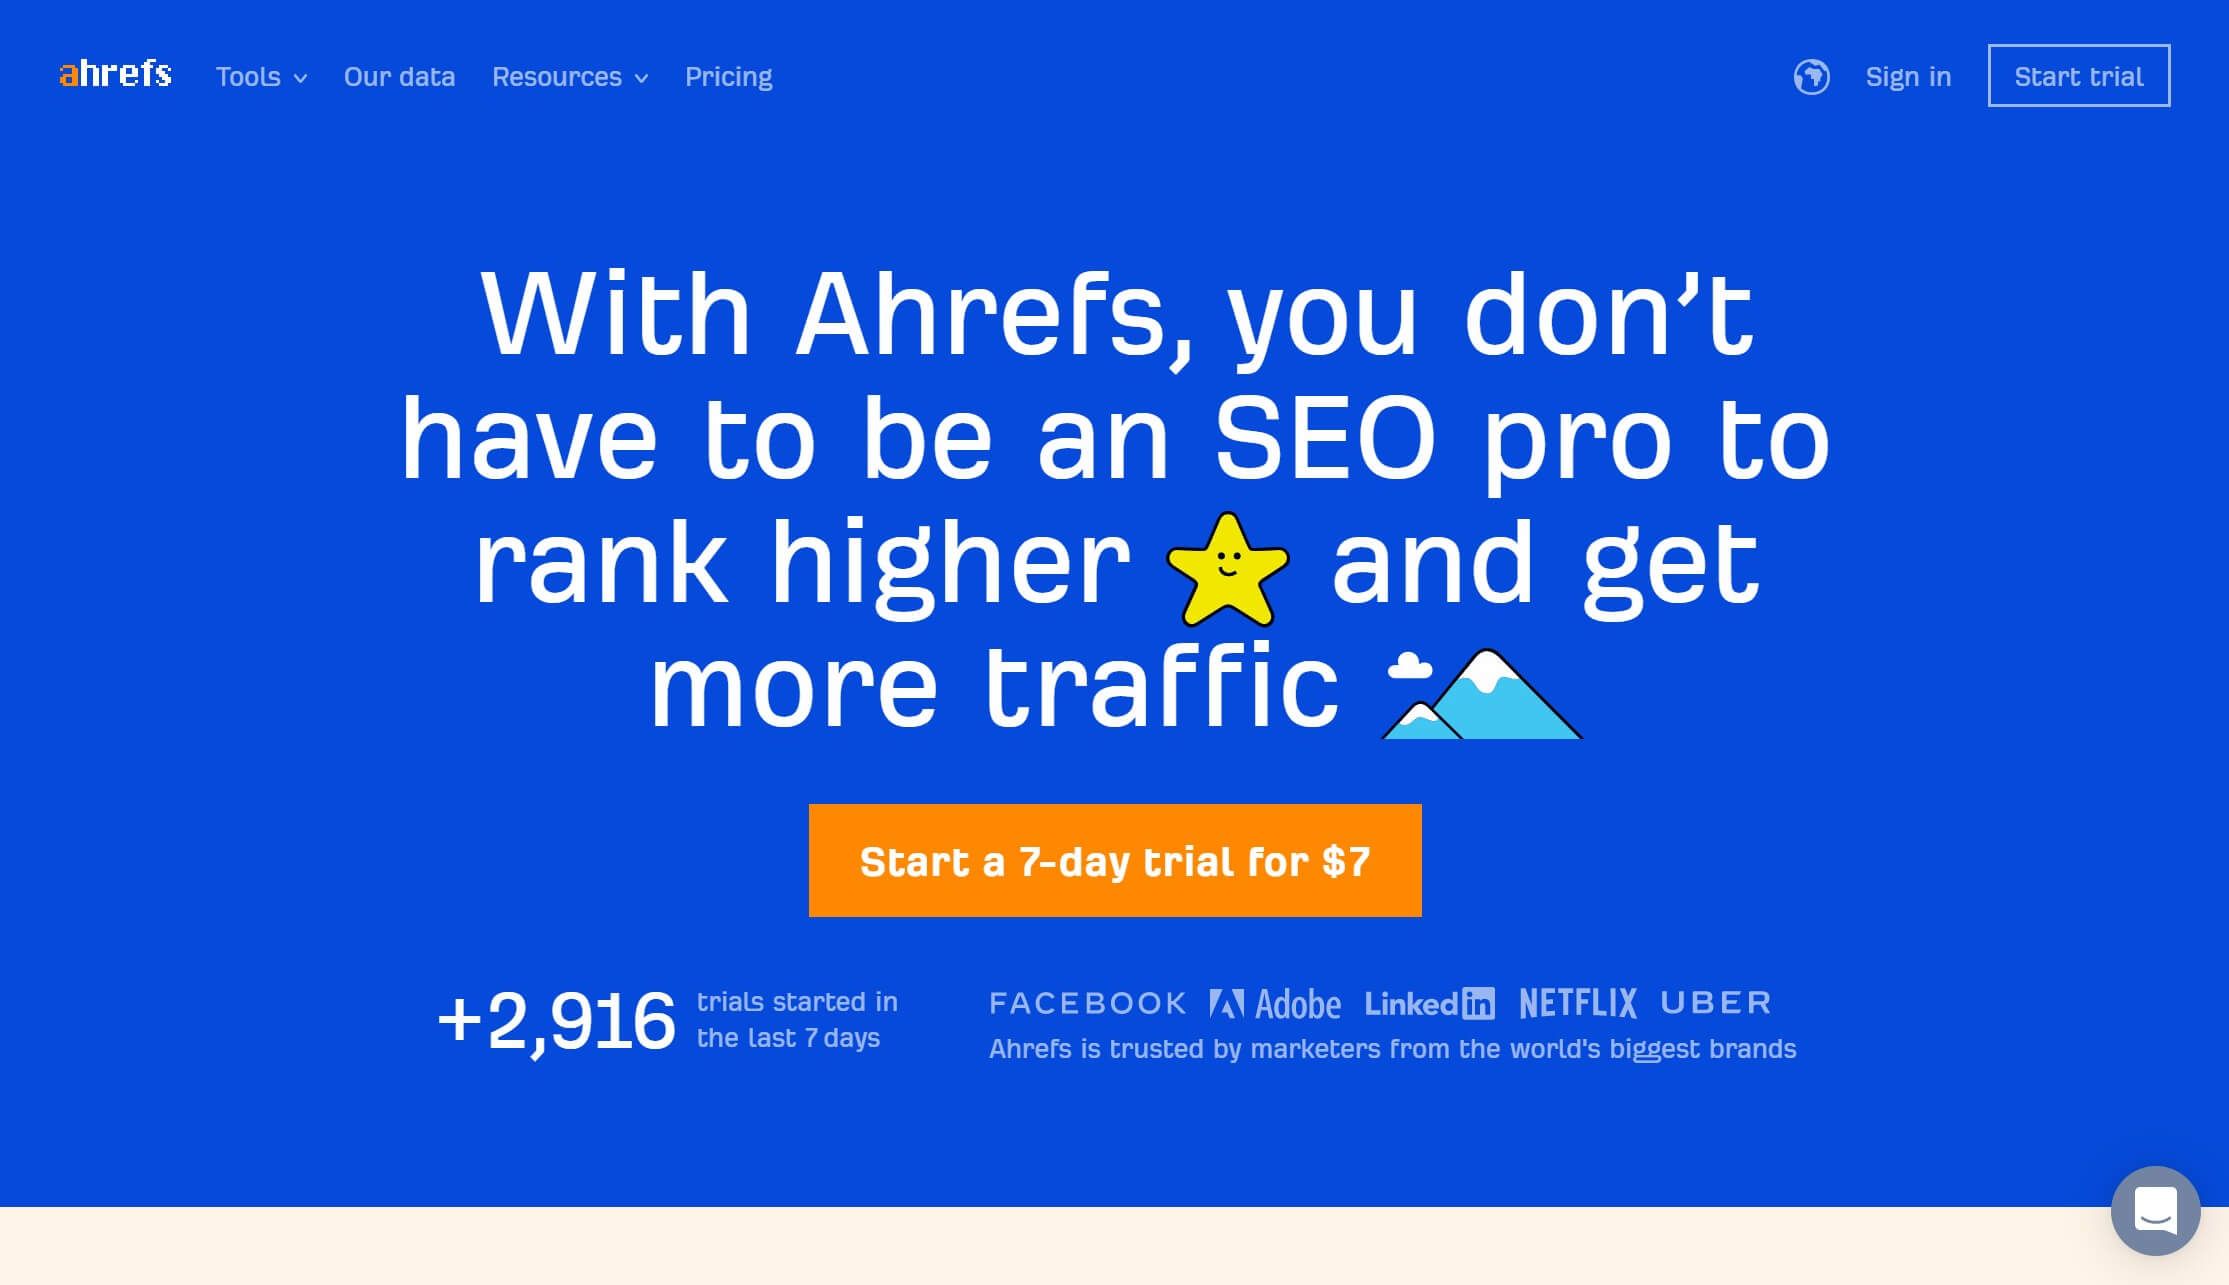 The Ahrefs home page.